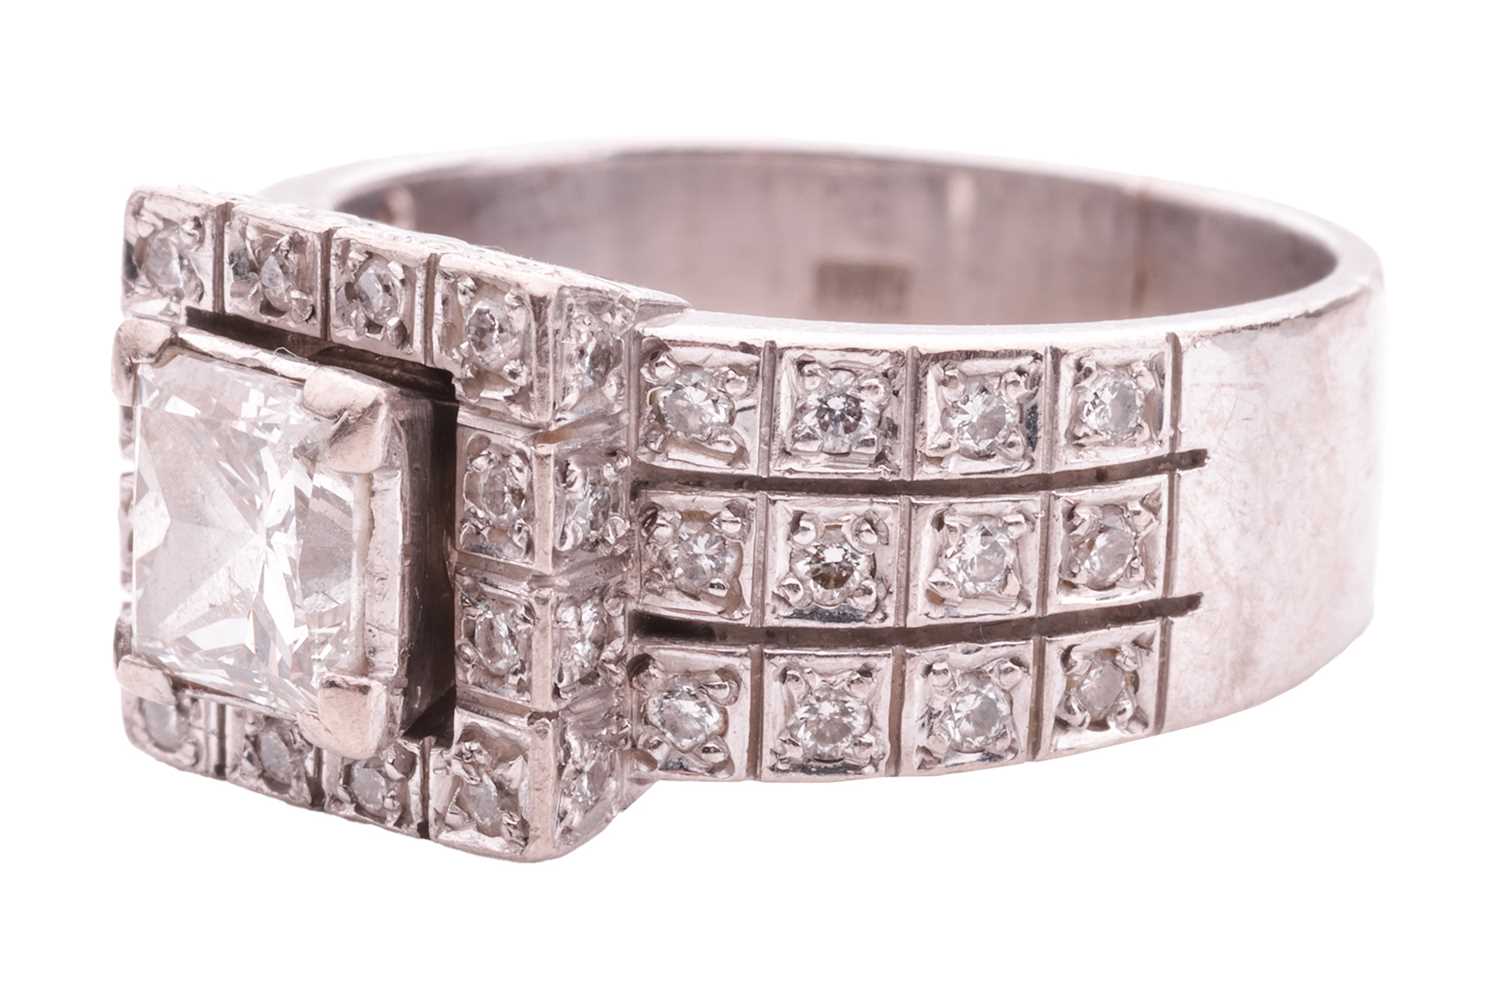 A princess-cut diamond cluster ring, featuring a princess-cut diamond with an estimated weight of 0. - Image 4 of 4